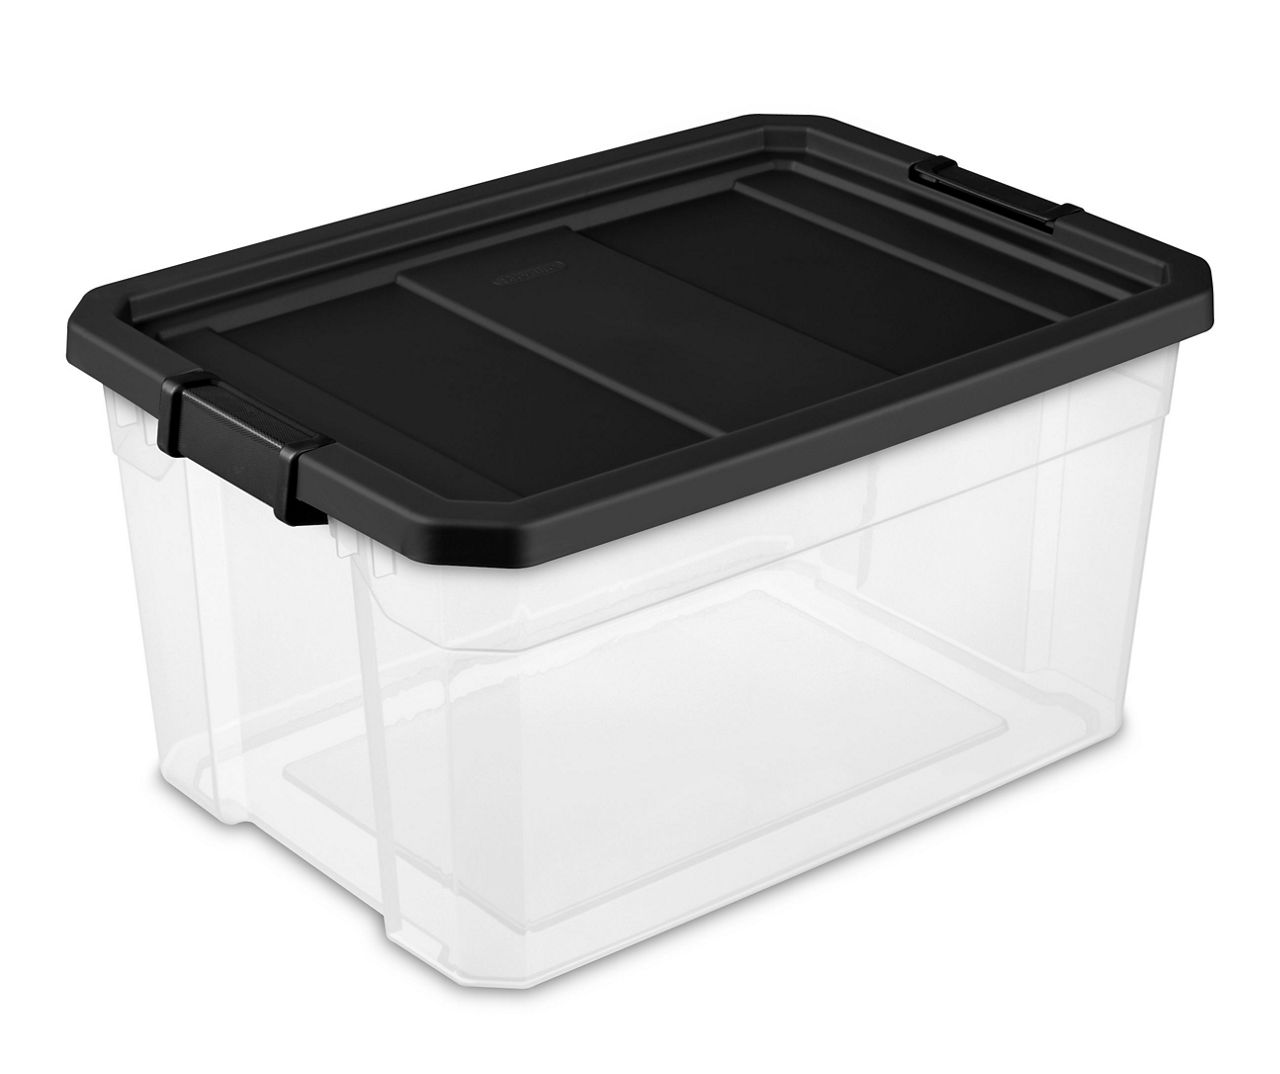 clearance storage totes｜TikTok Search